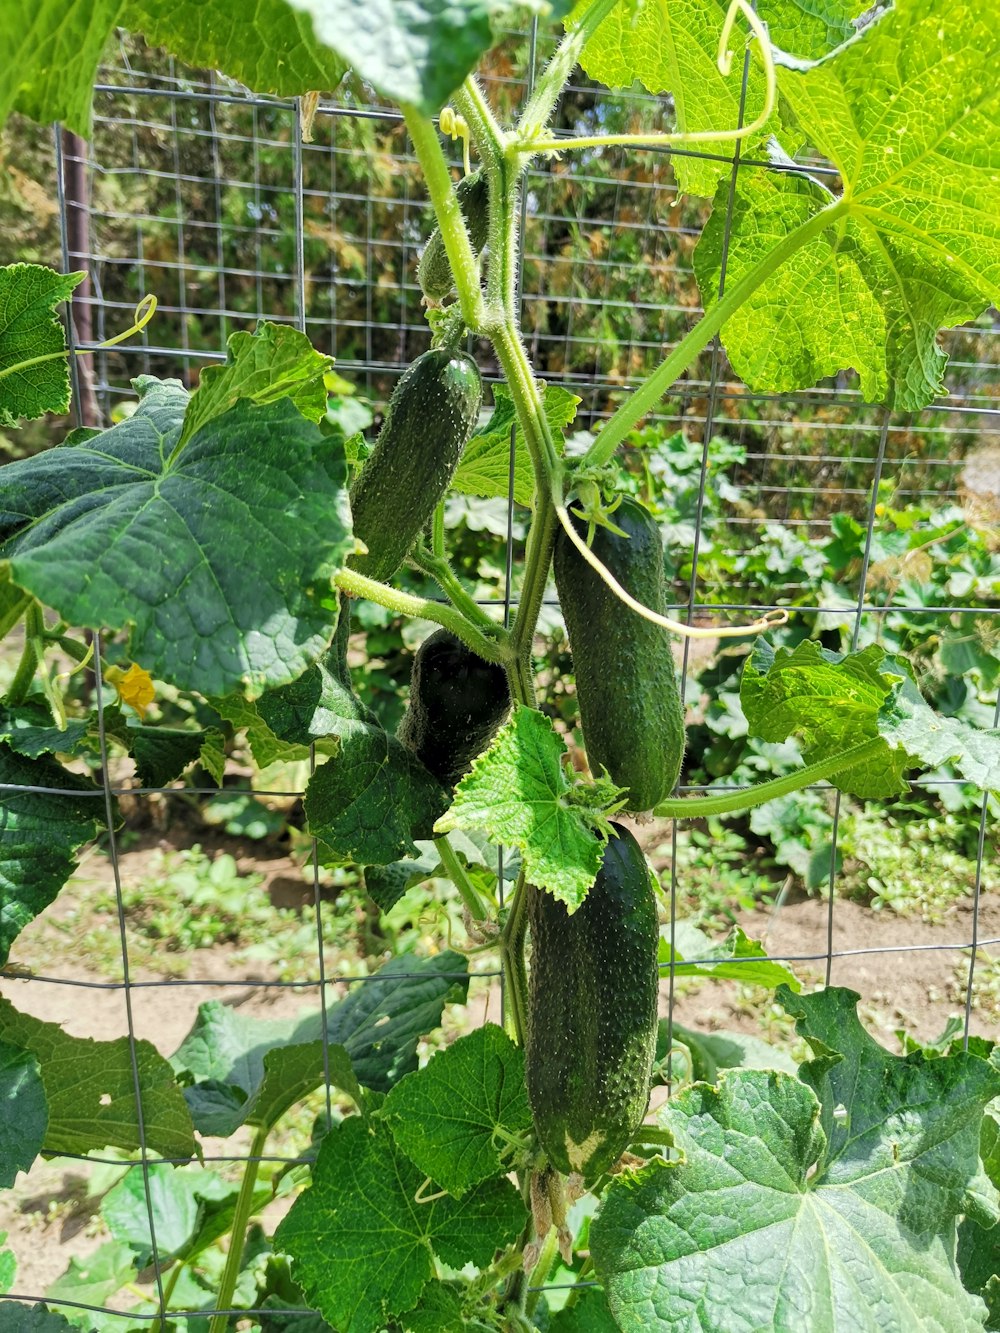 a cucumber growing in a garden next to a wire fence